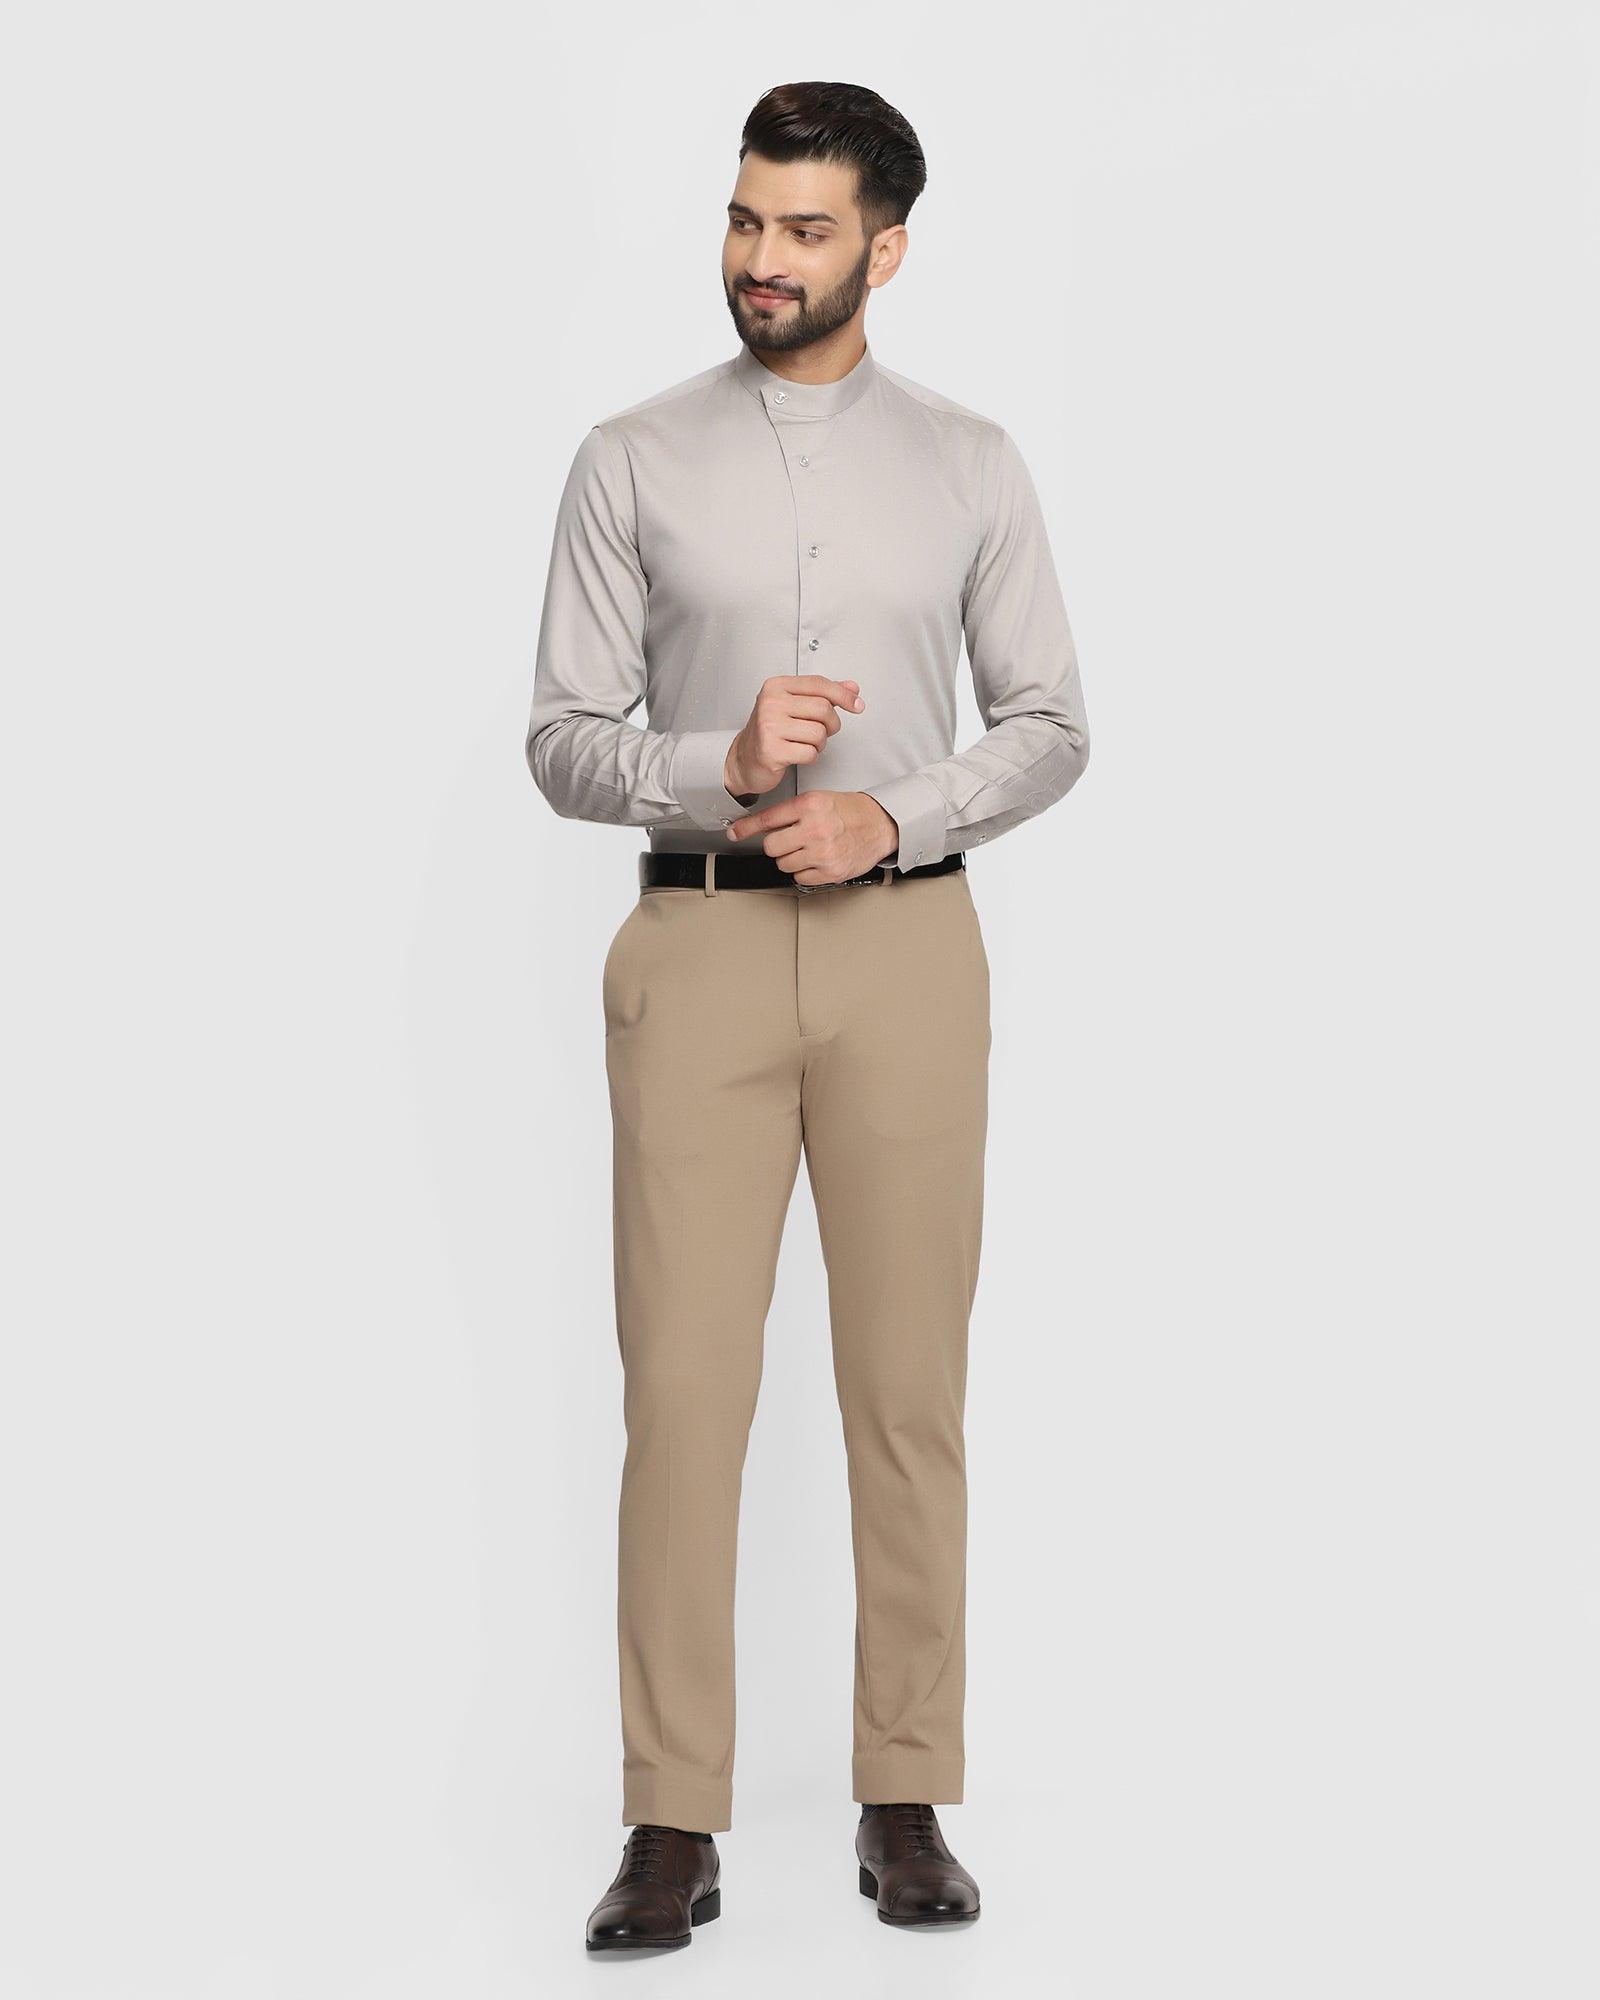 Buy Arrow Tapered Fit Autoflex Formal Trousers - NNNOW.com